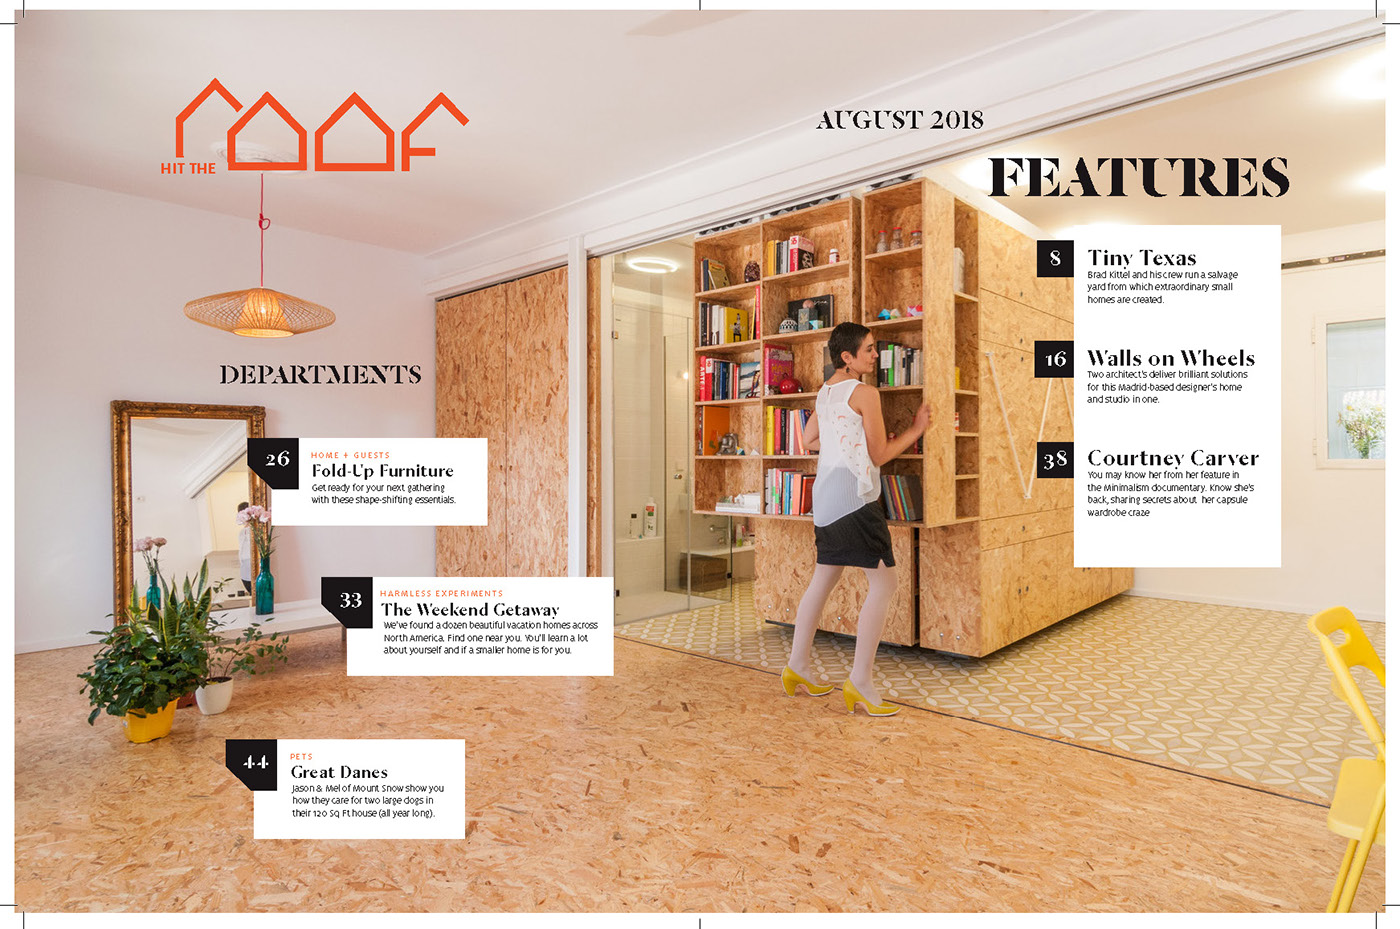 magazine Perfect Binding typography   editorial Layout HAND LETTERING tiny houses Hit the Roof